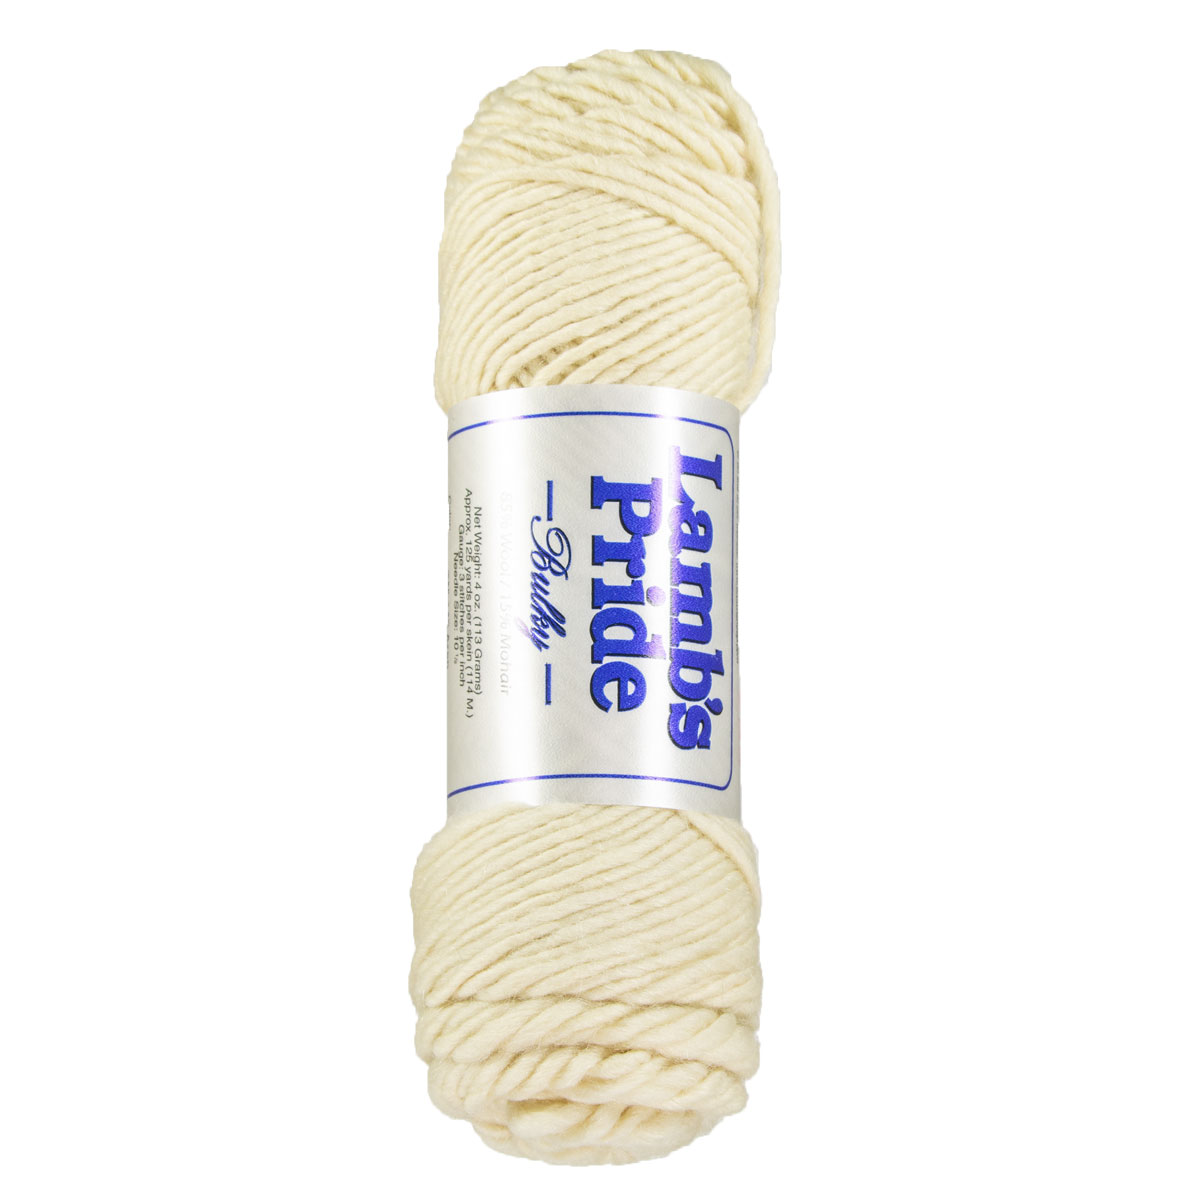 Brown Sheep Lamb's Pride Bulky Yarn - M011 - White Frost at Jimmy Beans Wool